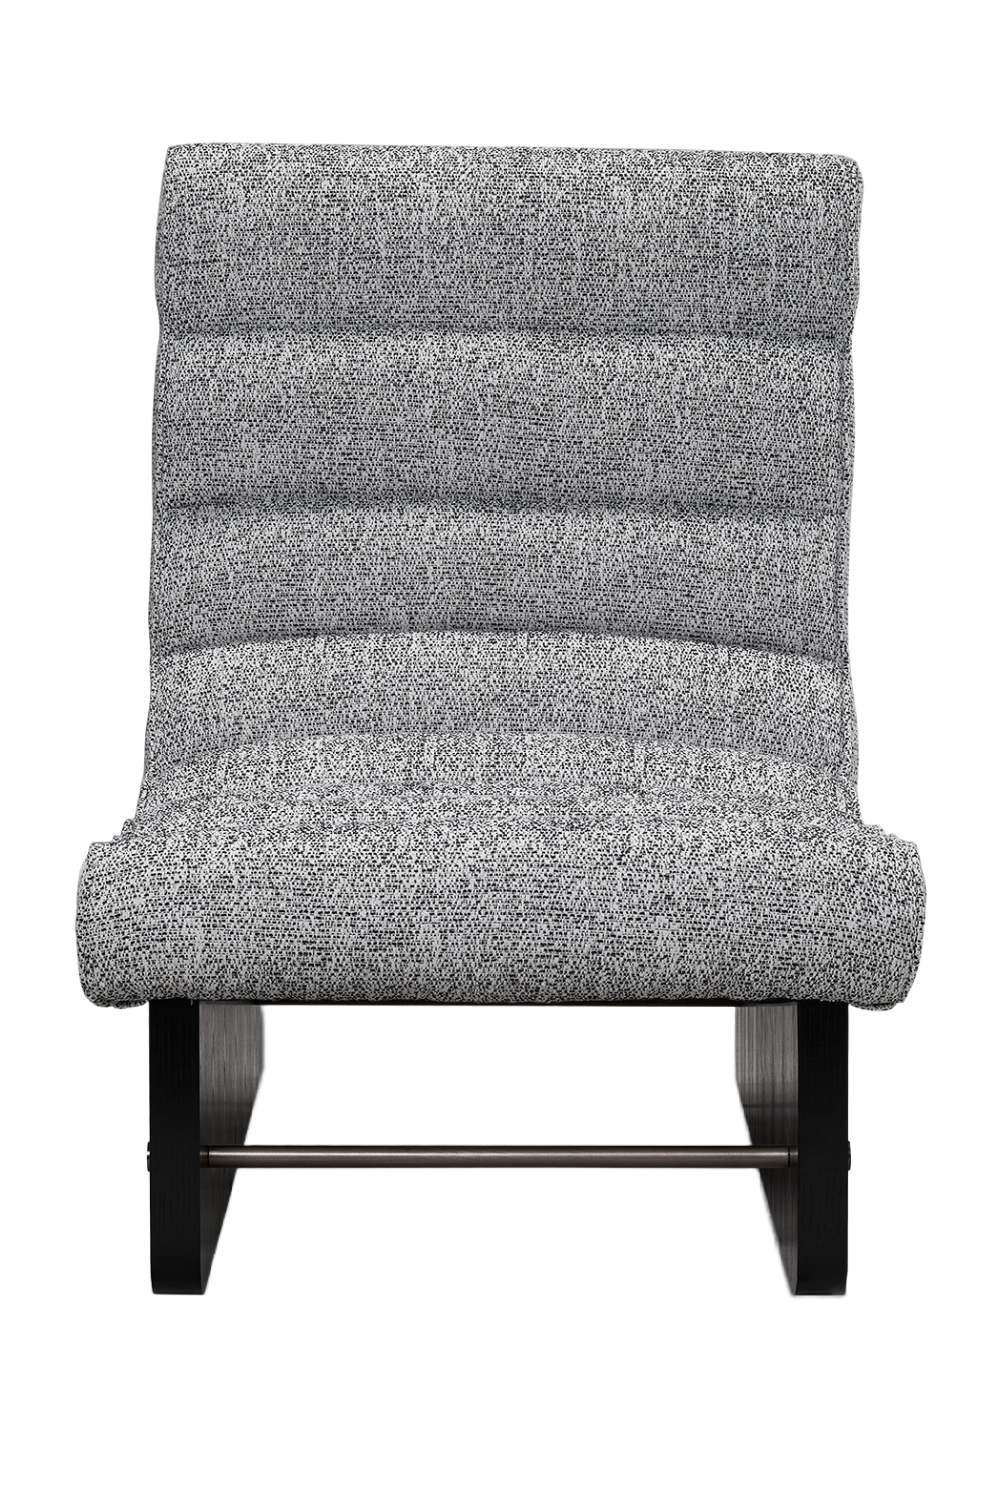 Channel Stitched Occasional Chair | Liang & Eimil Franklin | Oroa.com